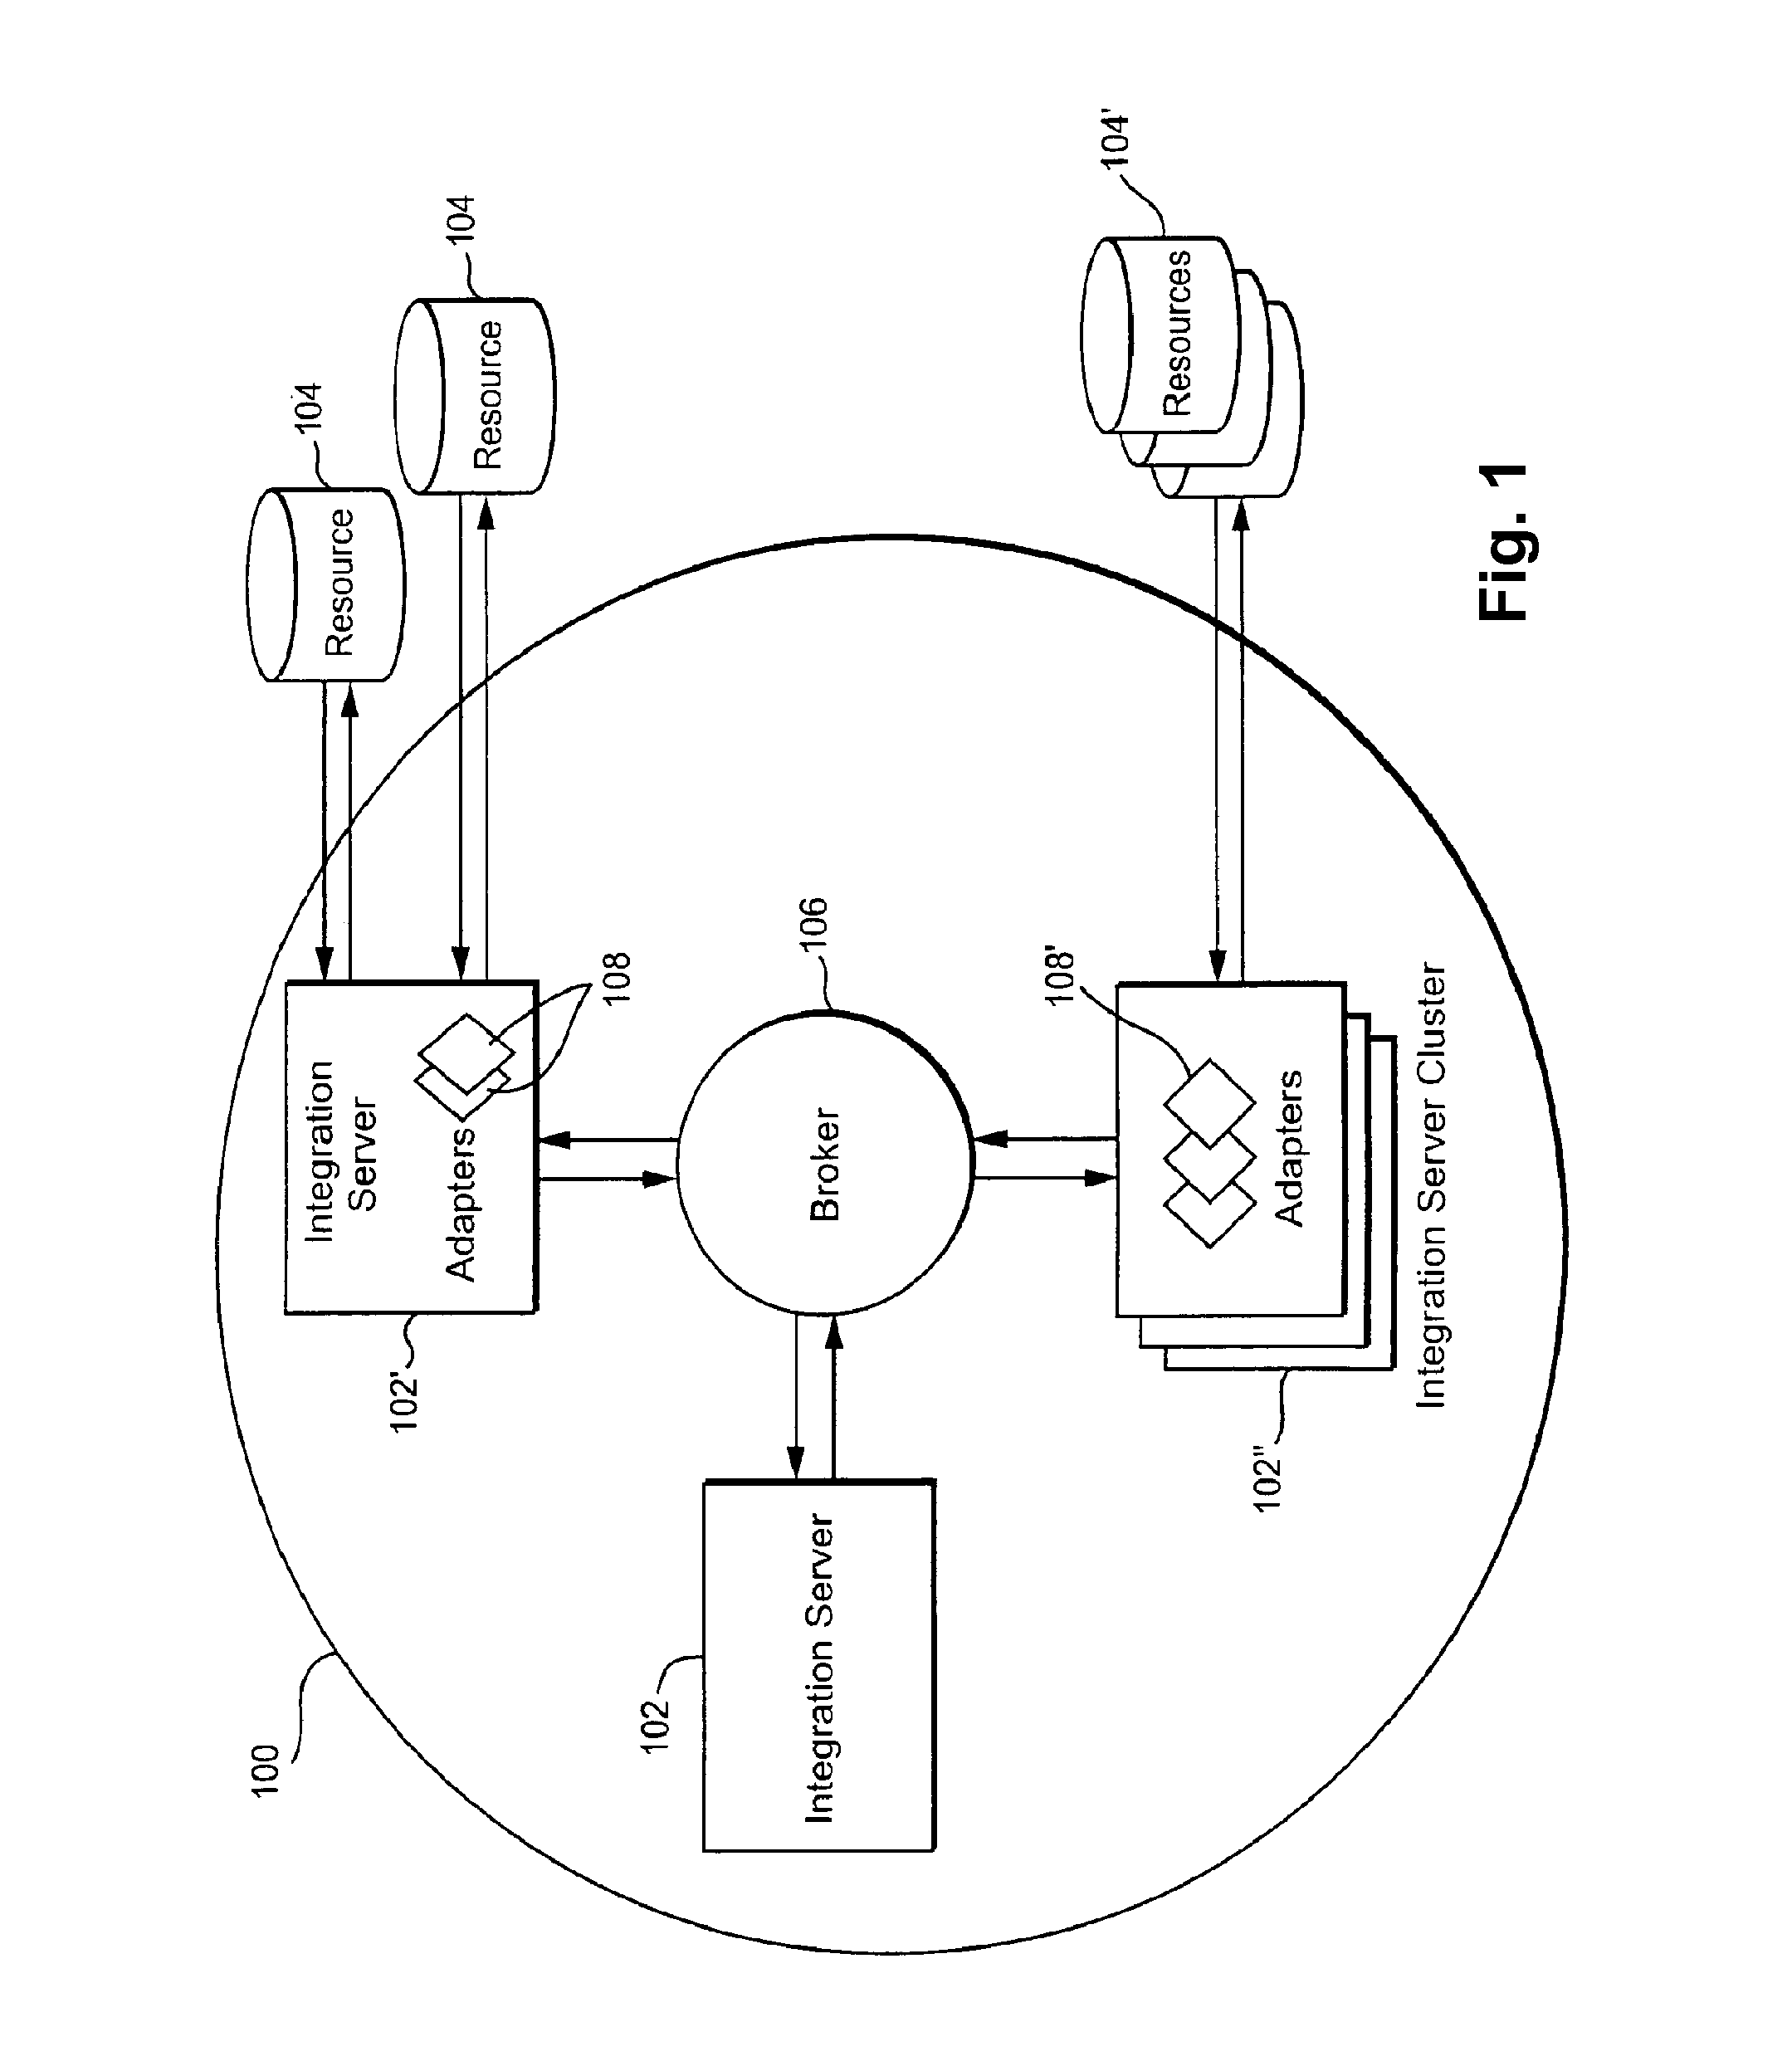 Systems and/or methods for automatically tuning a delivery system for transmission of large, volatile data